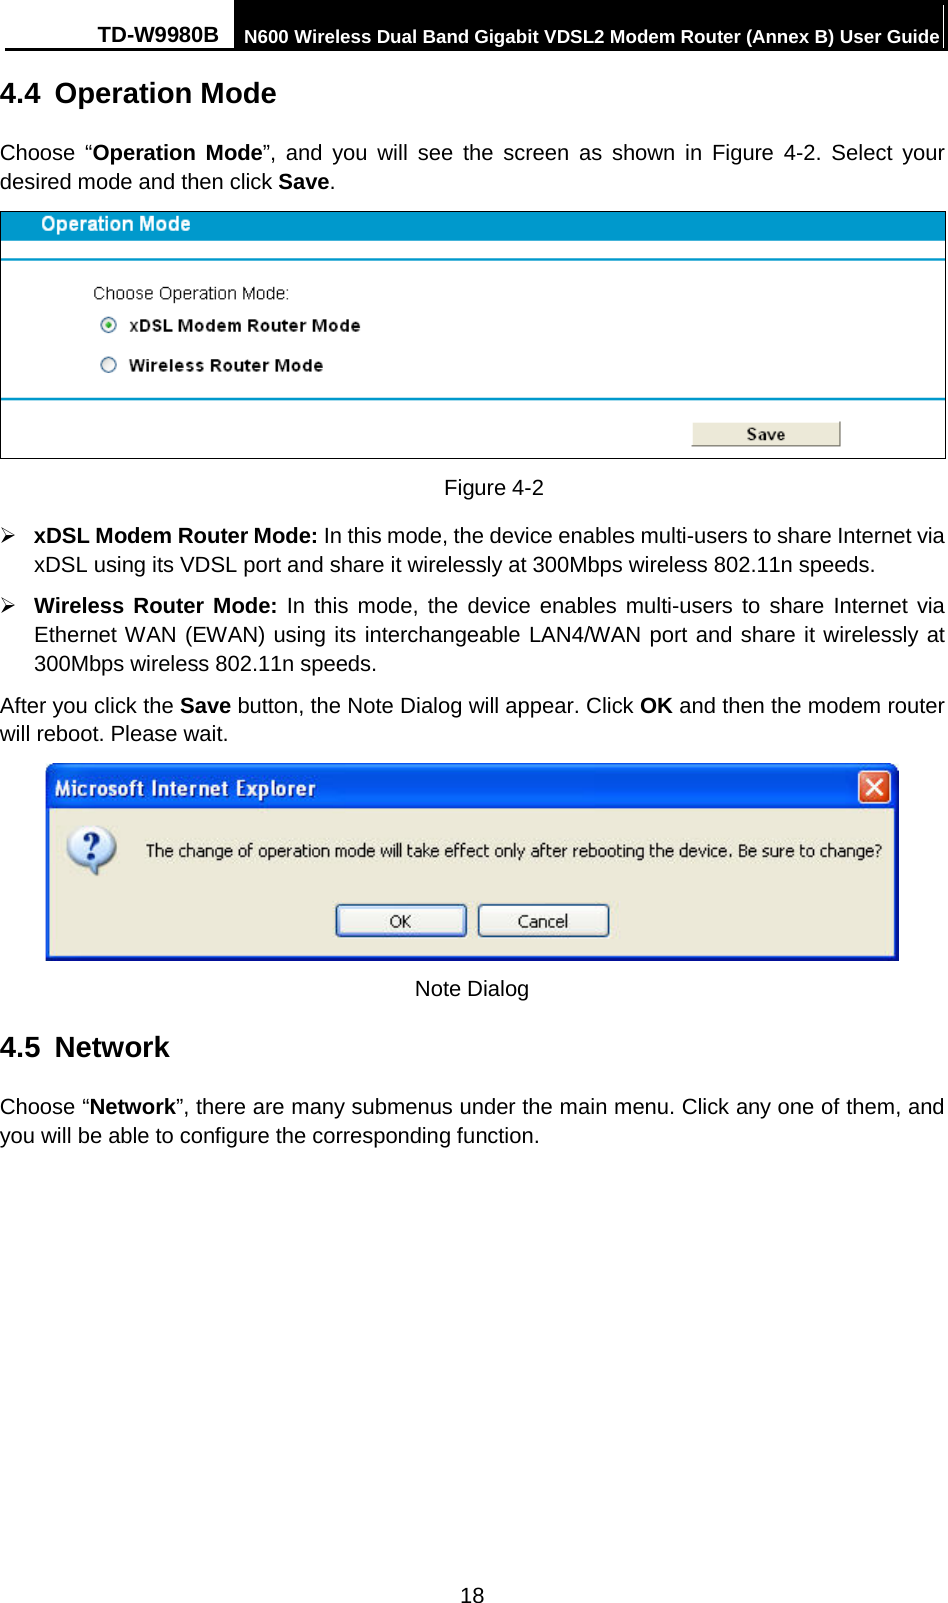 TD-W9980B N600 Wireless Dual Band Gigabit VDSL2 Modem Router (Annex B) User Guide  4.4 Operation Mode Choose “Operation Mode”, and you will see the screen as shown in Figure  4-2. Select your desired mode and then click Save.  Figure 4-2  xDSL Modem Router Mode: In this mode, the device enables multi-users to share Internet via xDSL using its VDSL port and share it wirelessly at 300Mbps wireless 802.11n speeds.    Wireless Router Mode: In this mode, the device enables multi-users to share Internet via Ethernet WAN (EWAN) using its interchangeable LAN4/WAN port and share it wirelessly at 300Mbps wireless 802.11n speeds.   After you click the Save button, the Note Dialog will appear. Click OK and then the modem router will reboot. Please wait.  Note Dialog 4.5 Network Choose “Network”, there are many submenus under the main menu. Click any one of them, and you will be able to configure the corresponding function.   18 